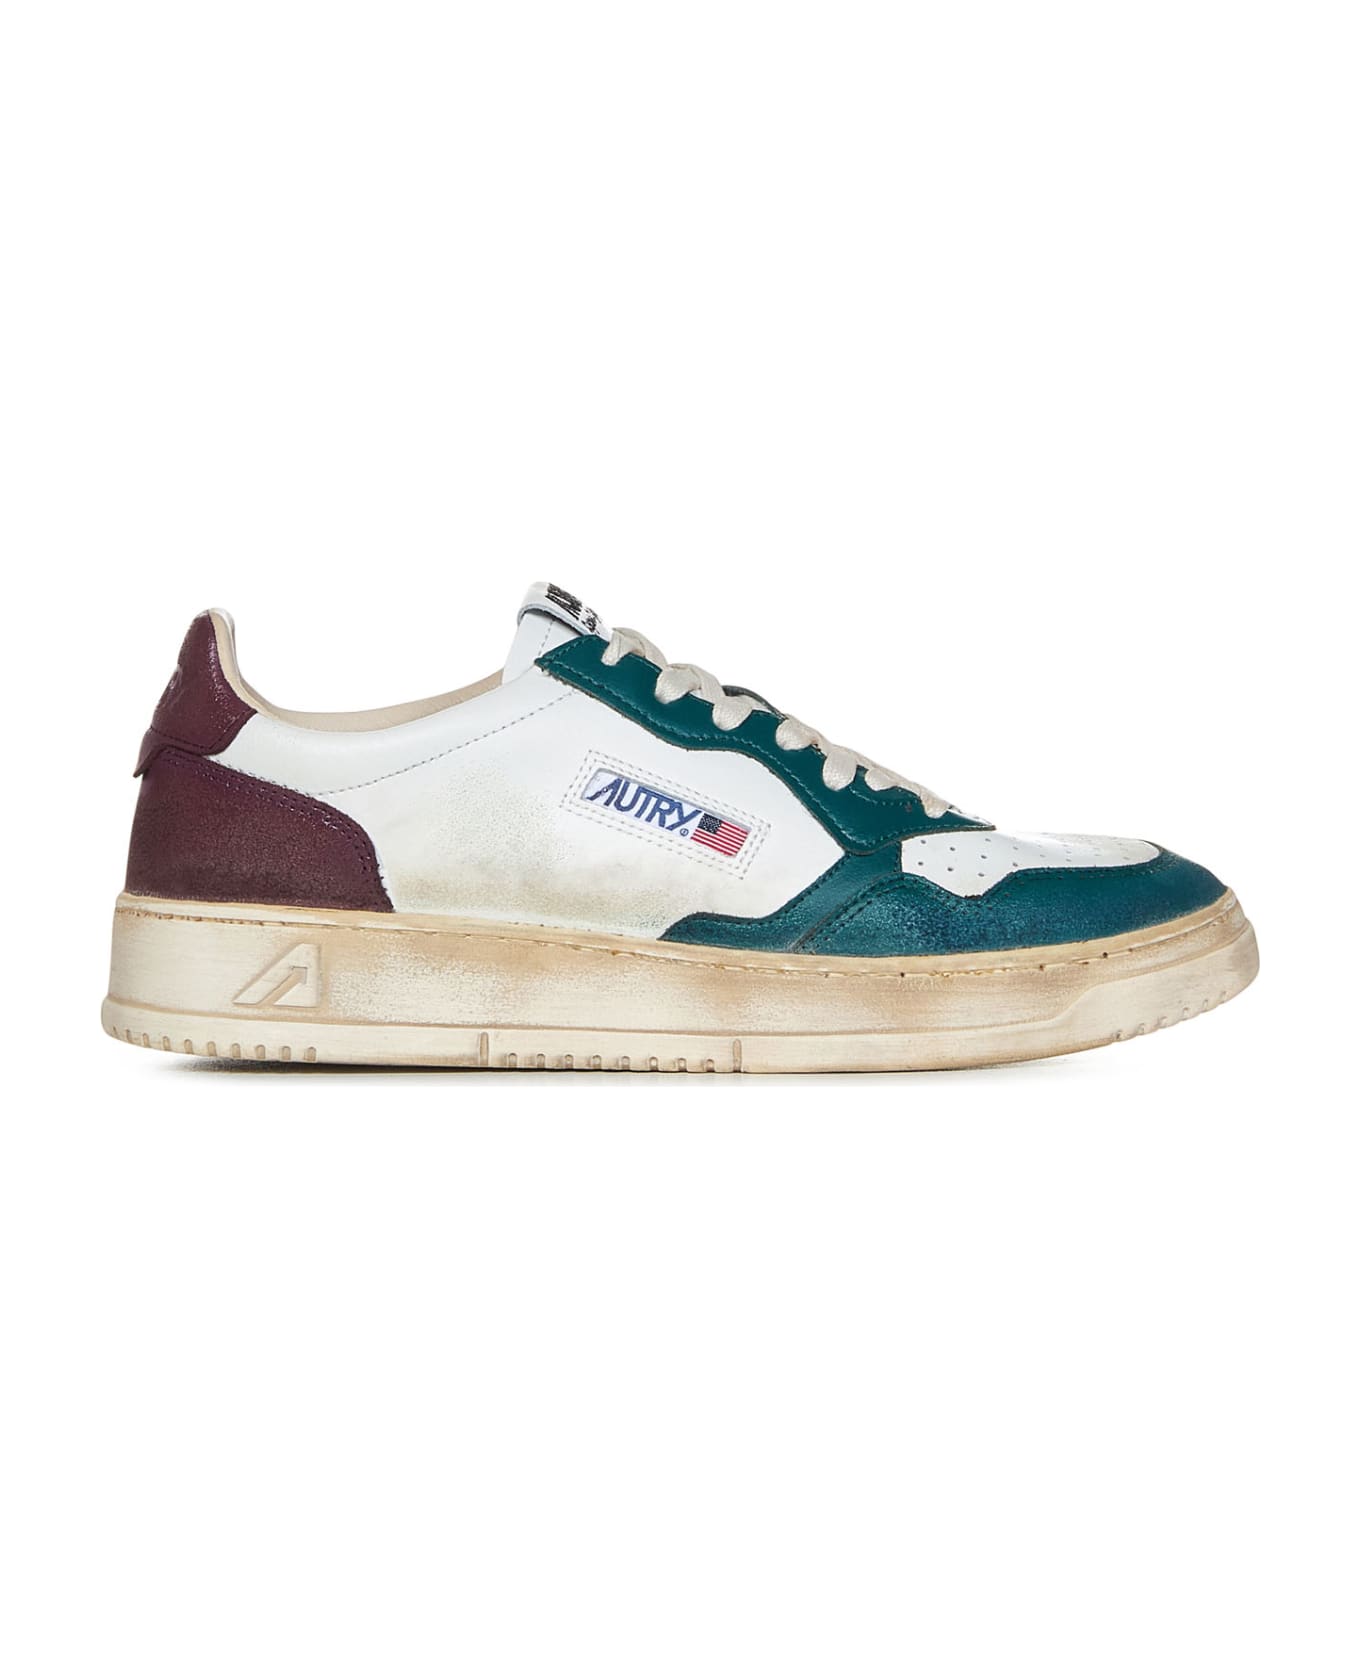 Autry Super Vintage Sneakers - White スニーカー